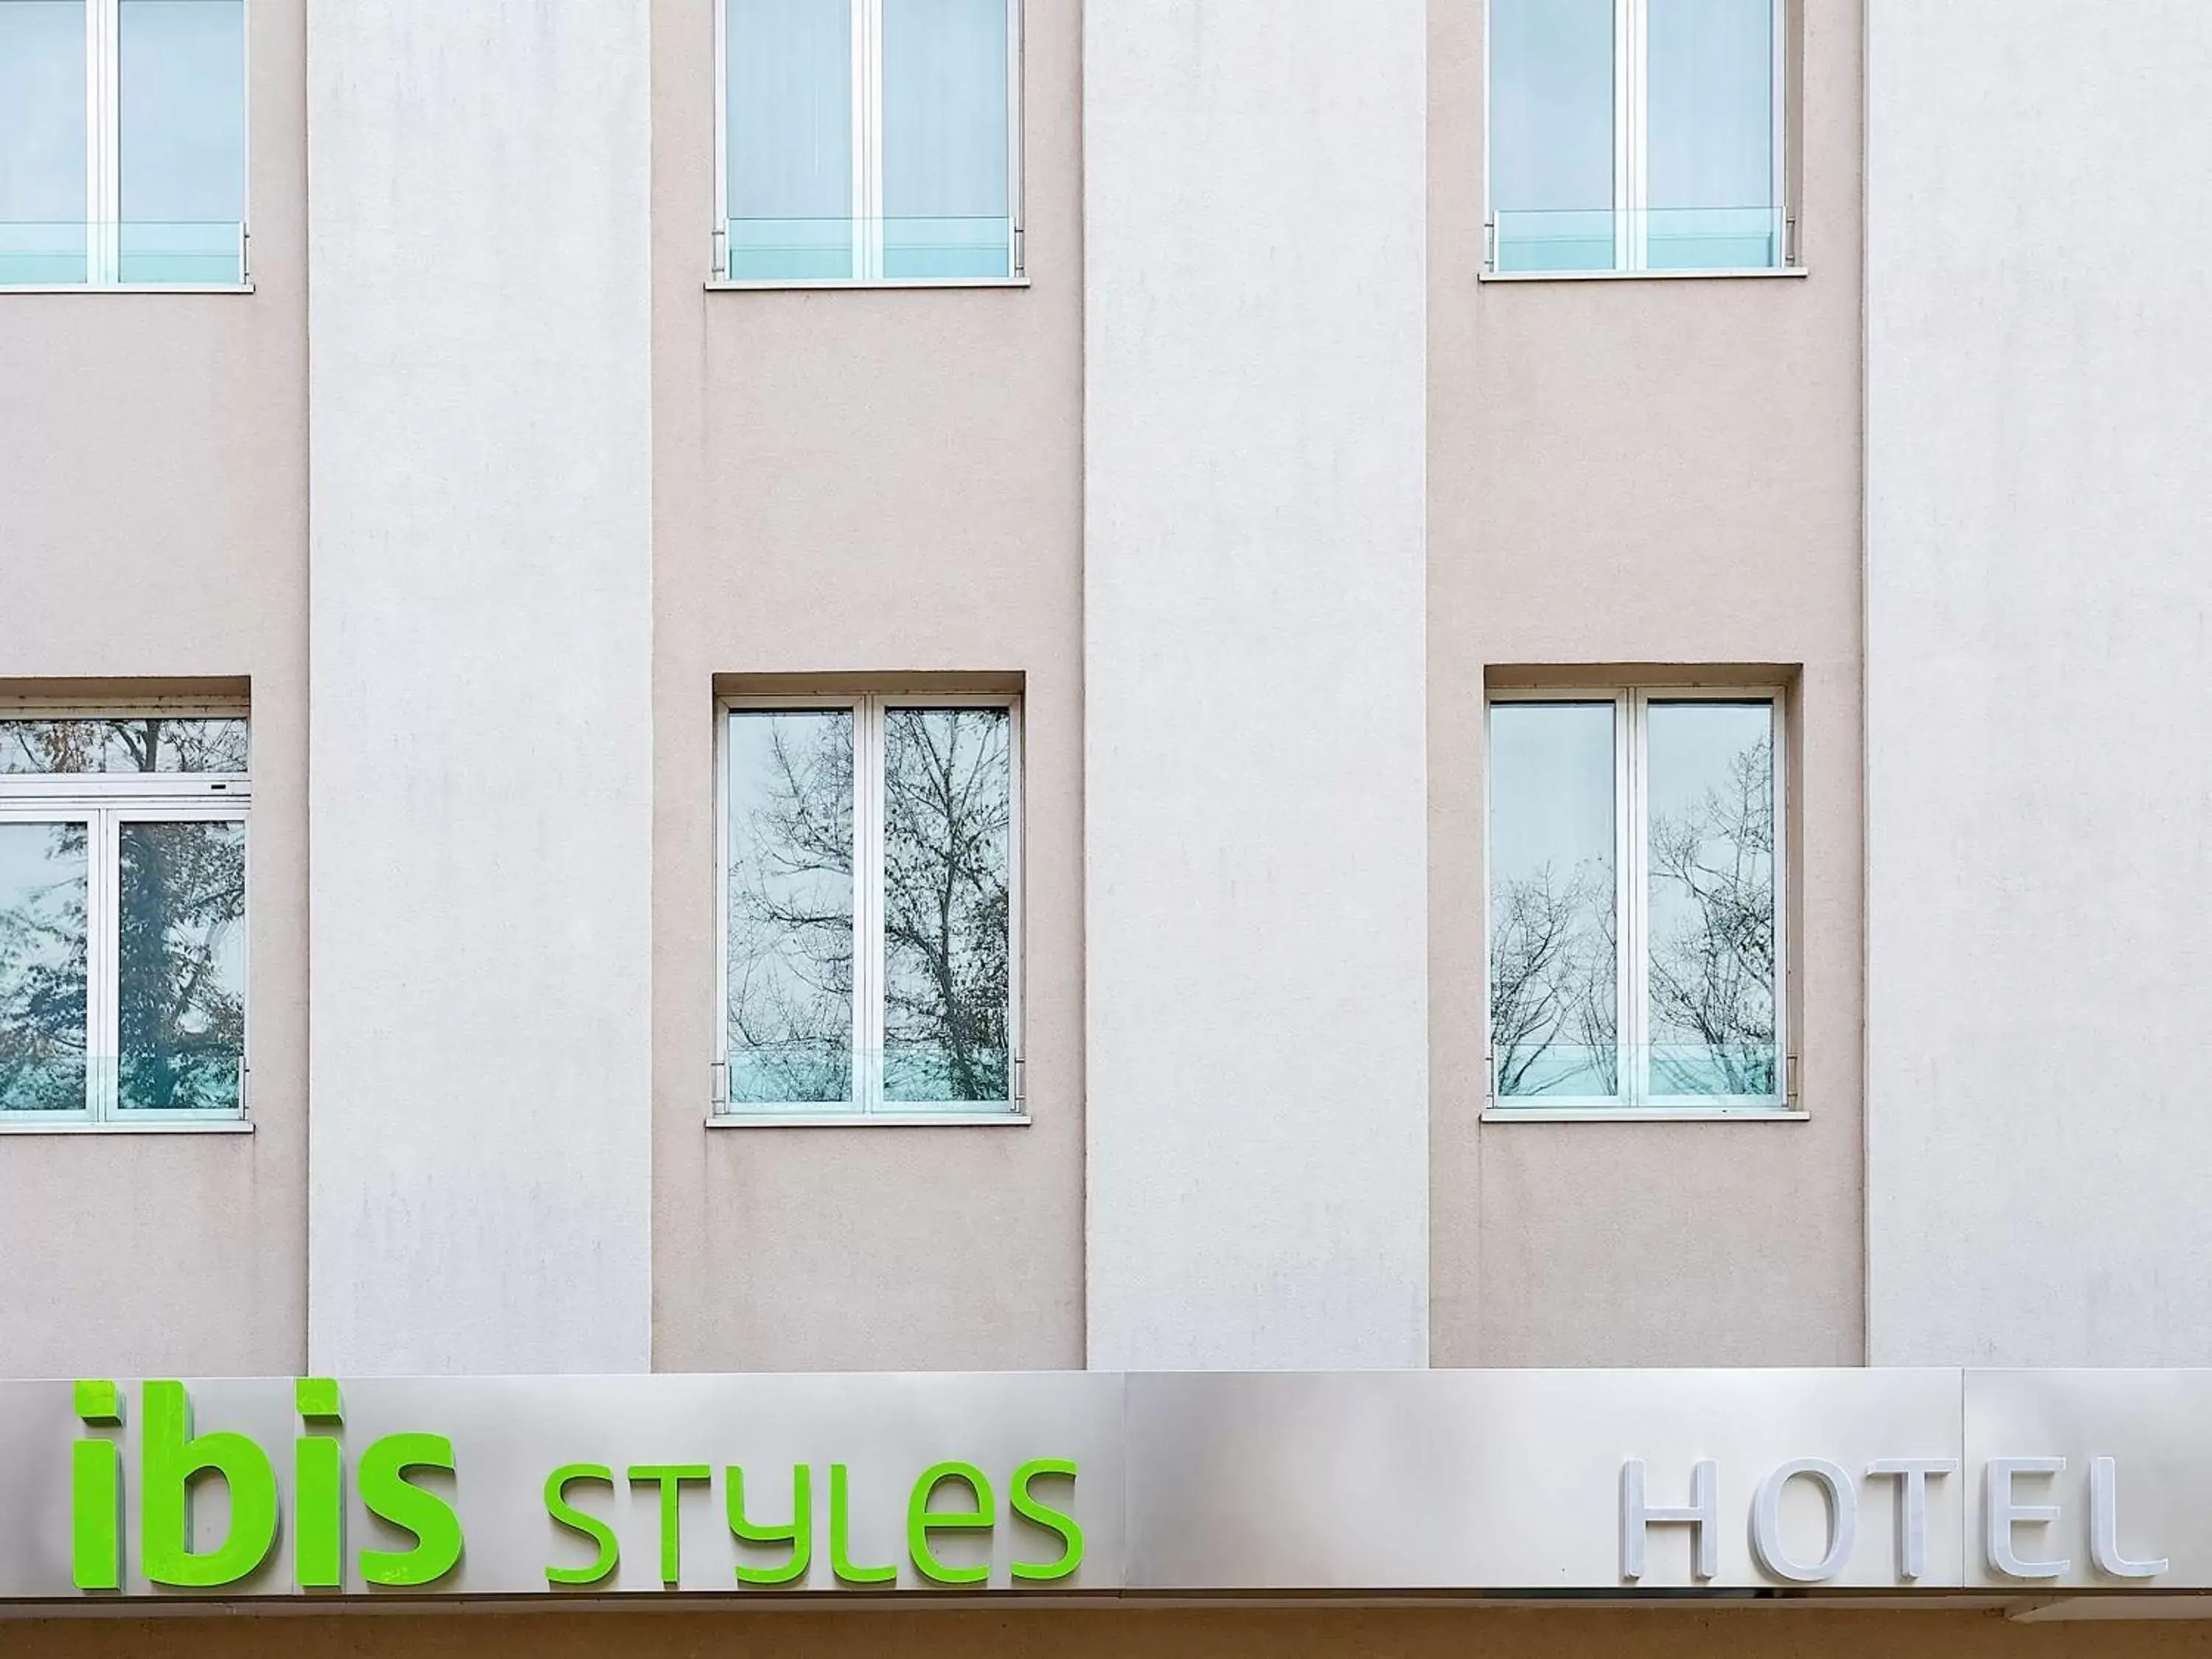 Property building in Ibis Styles Parma Toscanini